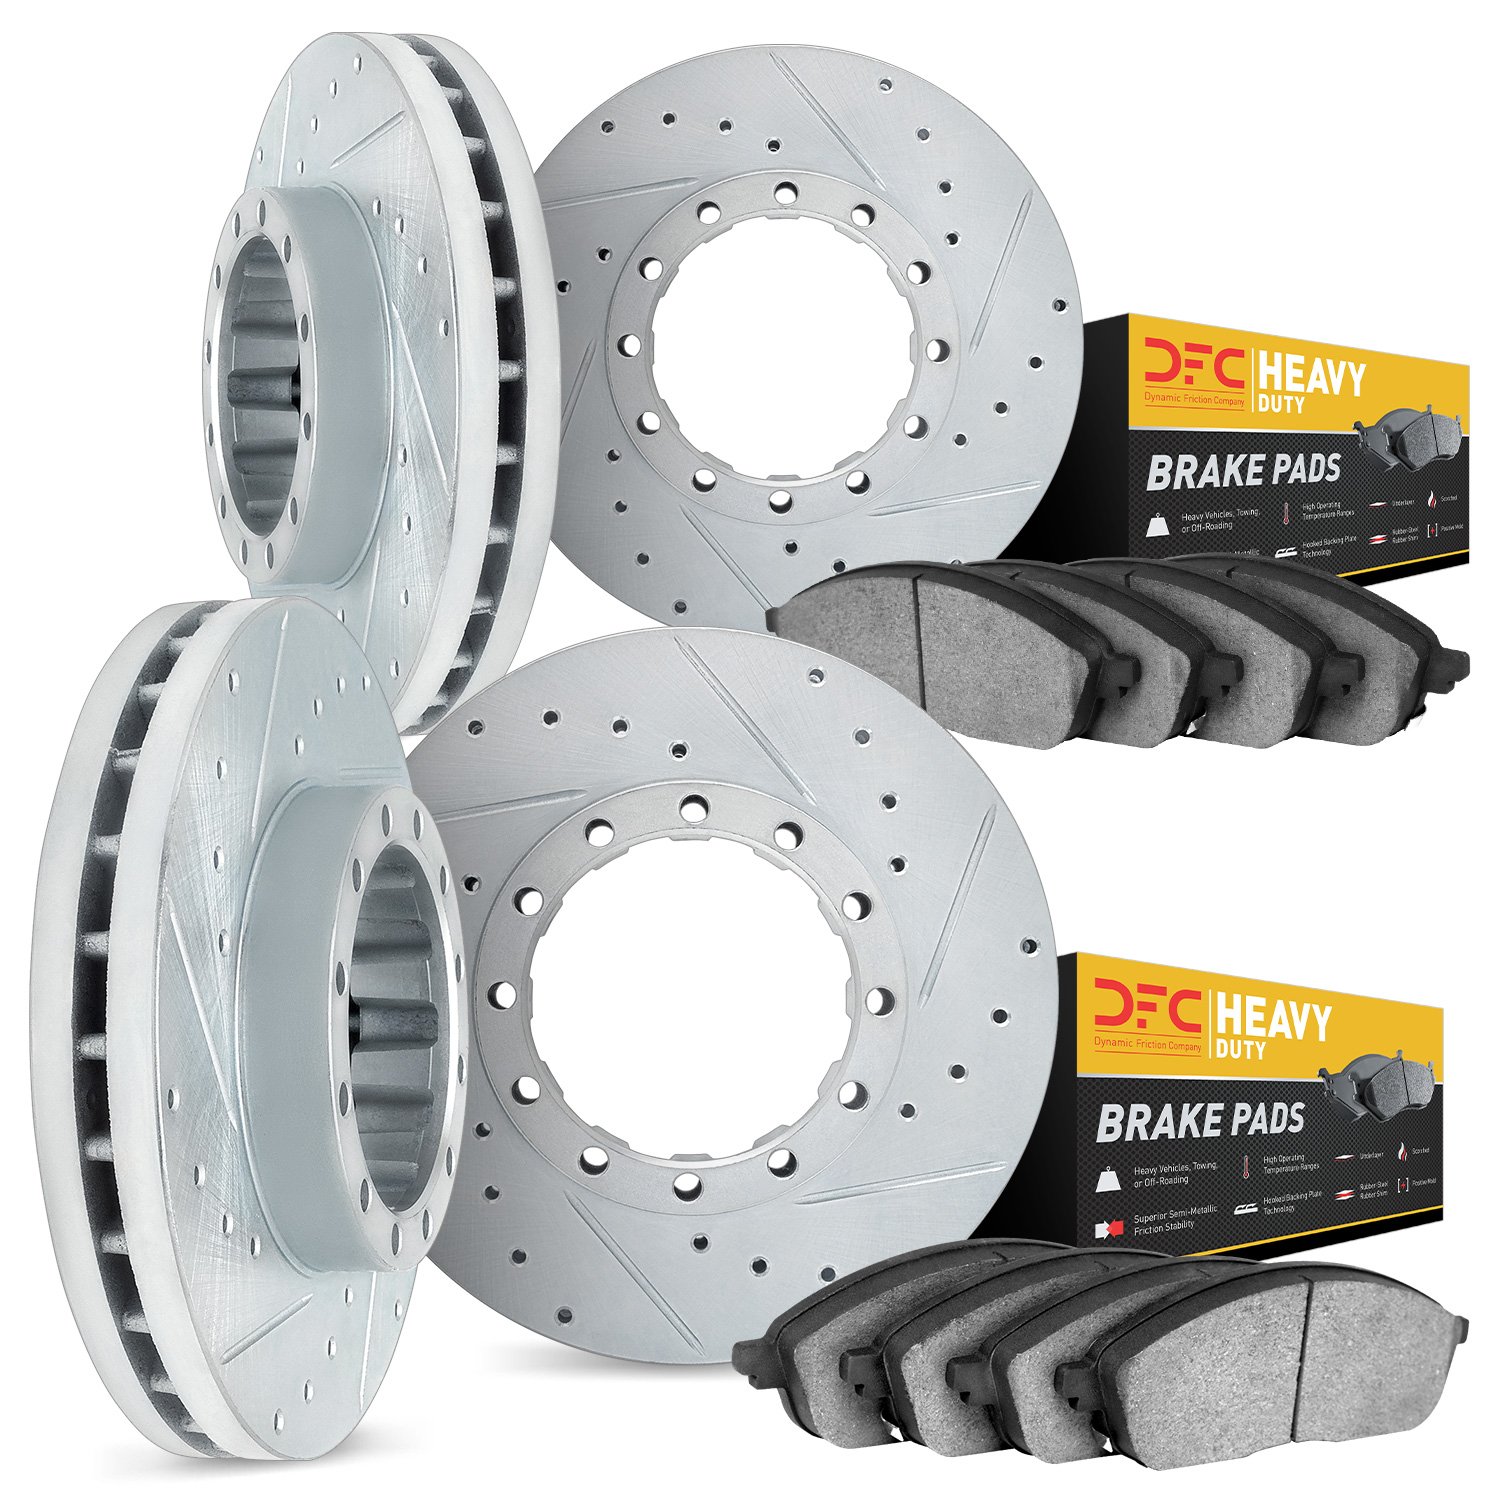 7204-72061 Drilled/Slotted Rotors w/Heavy-Duty Brake Pads Kit [Silver], 2010-2011 Freightliner, Position: Front and Rear